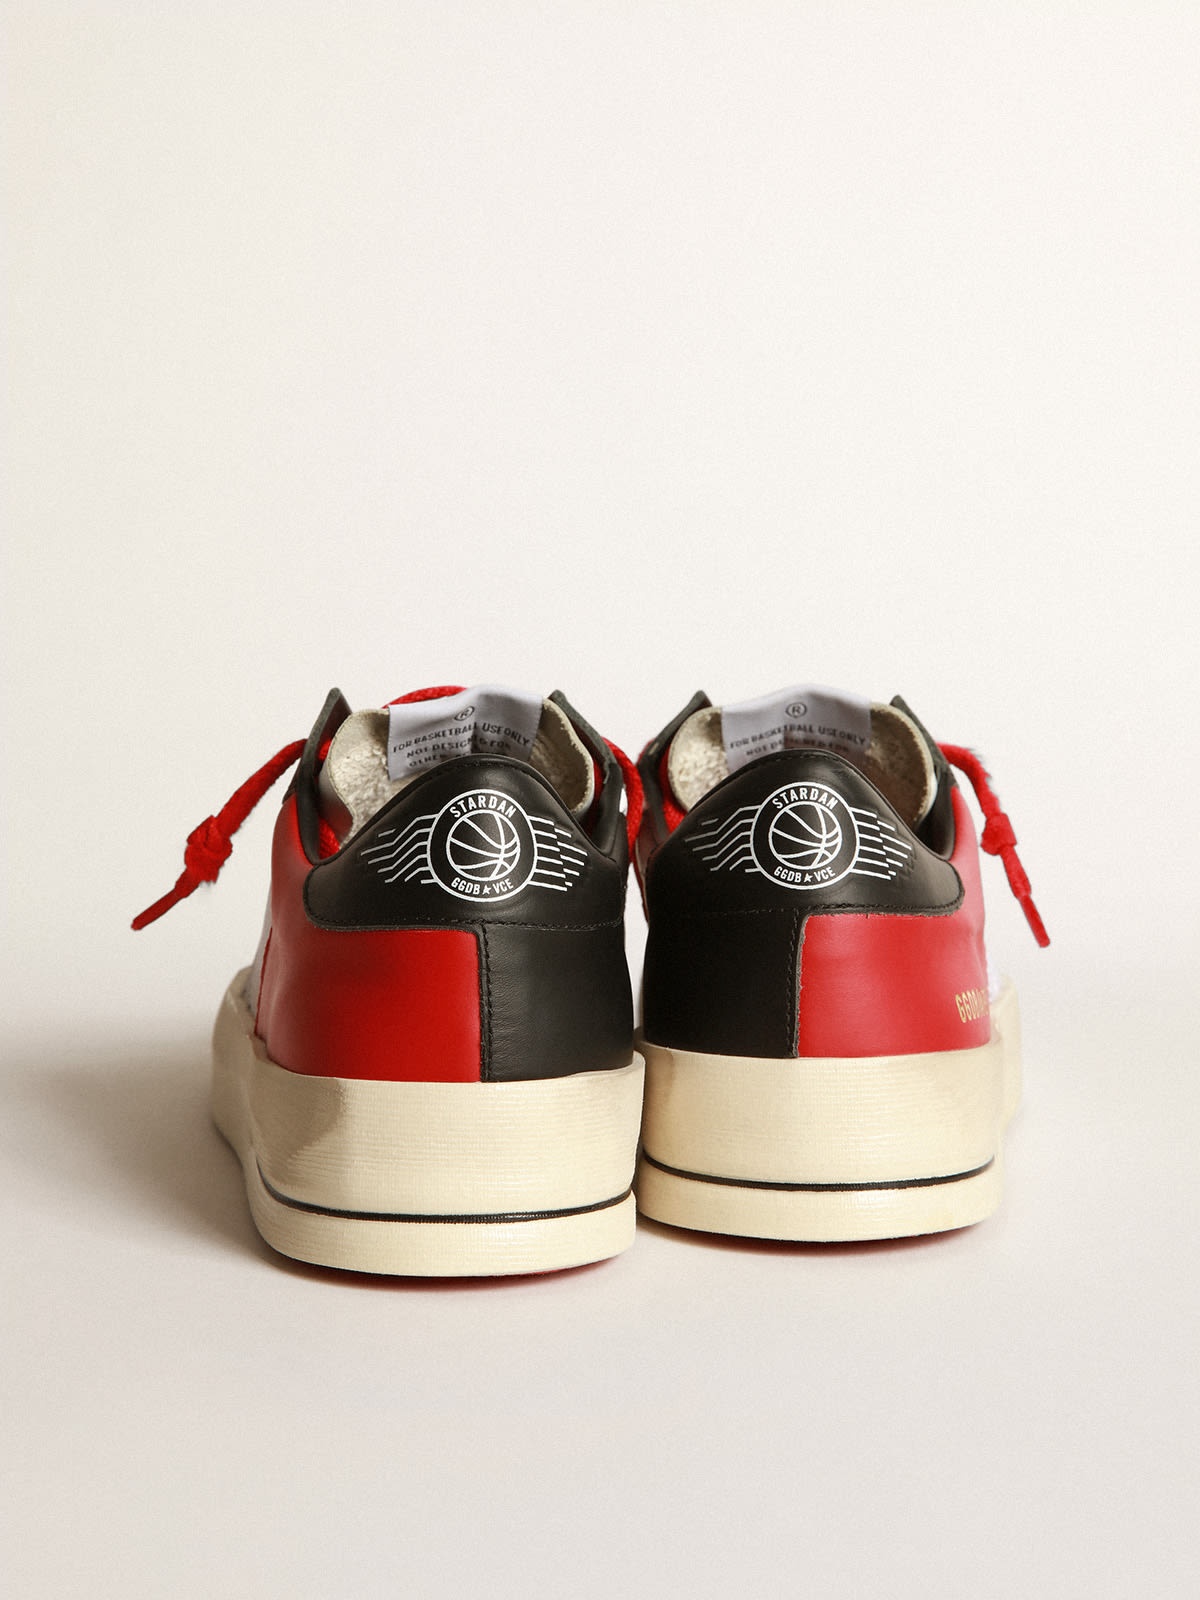 Stardan sneakers in red and white leather with mesh inserts - 4